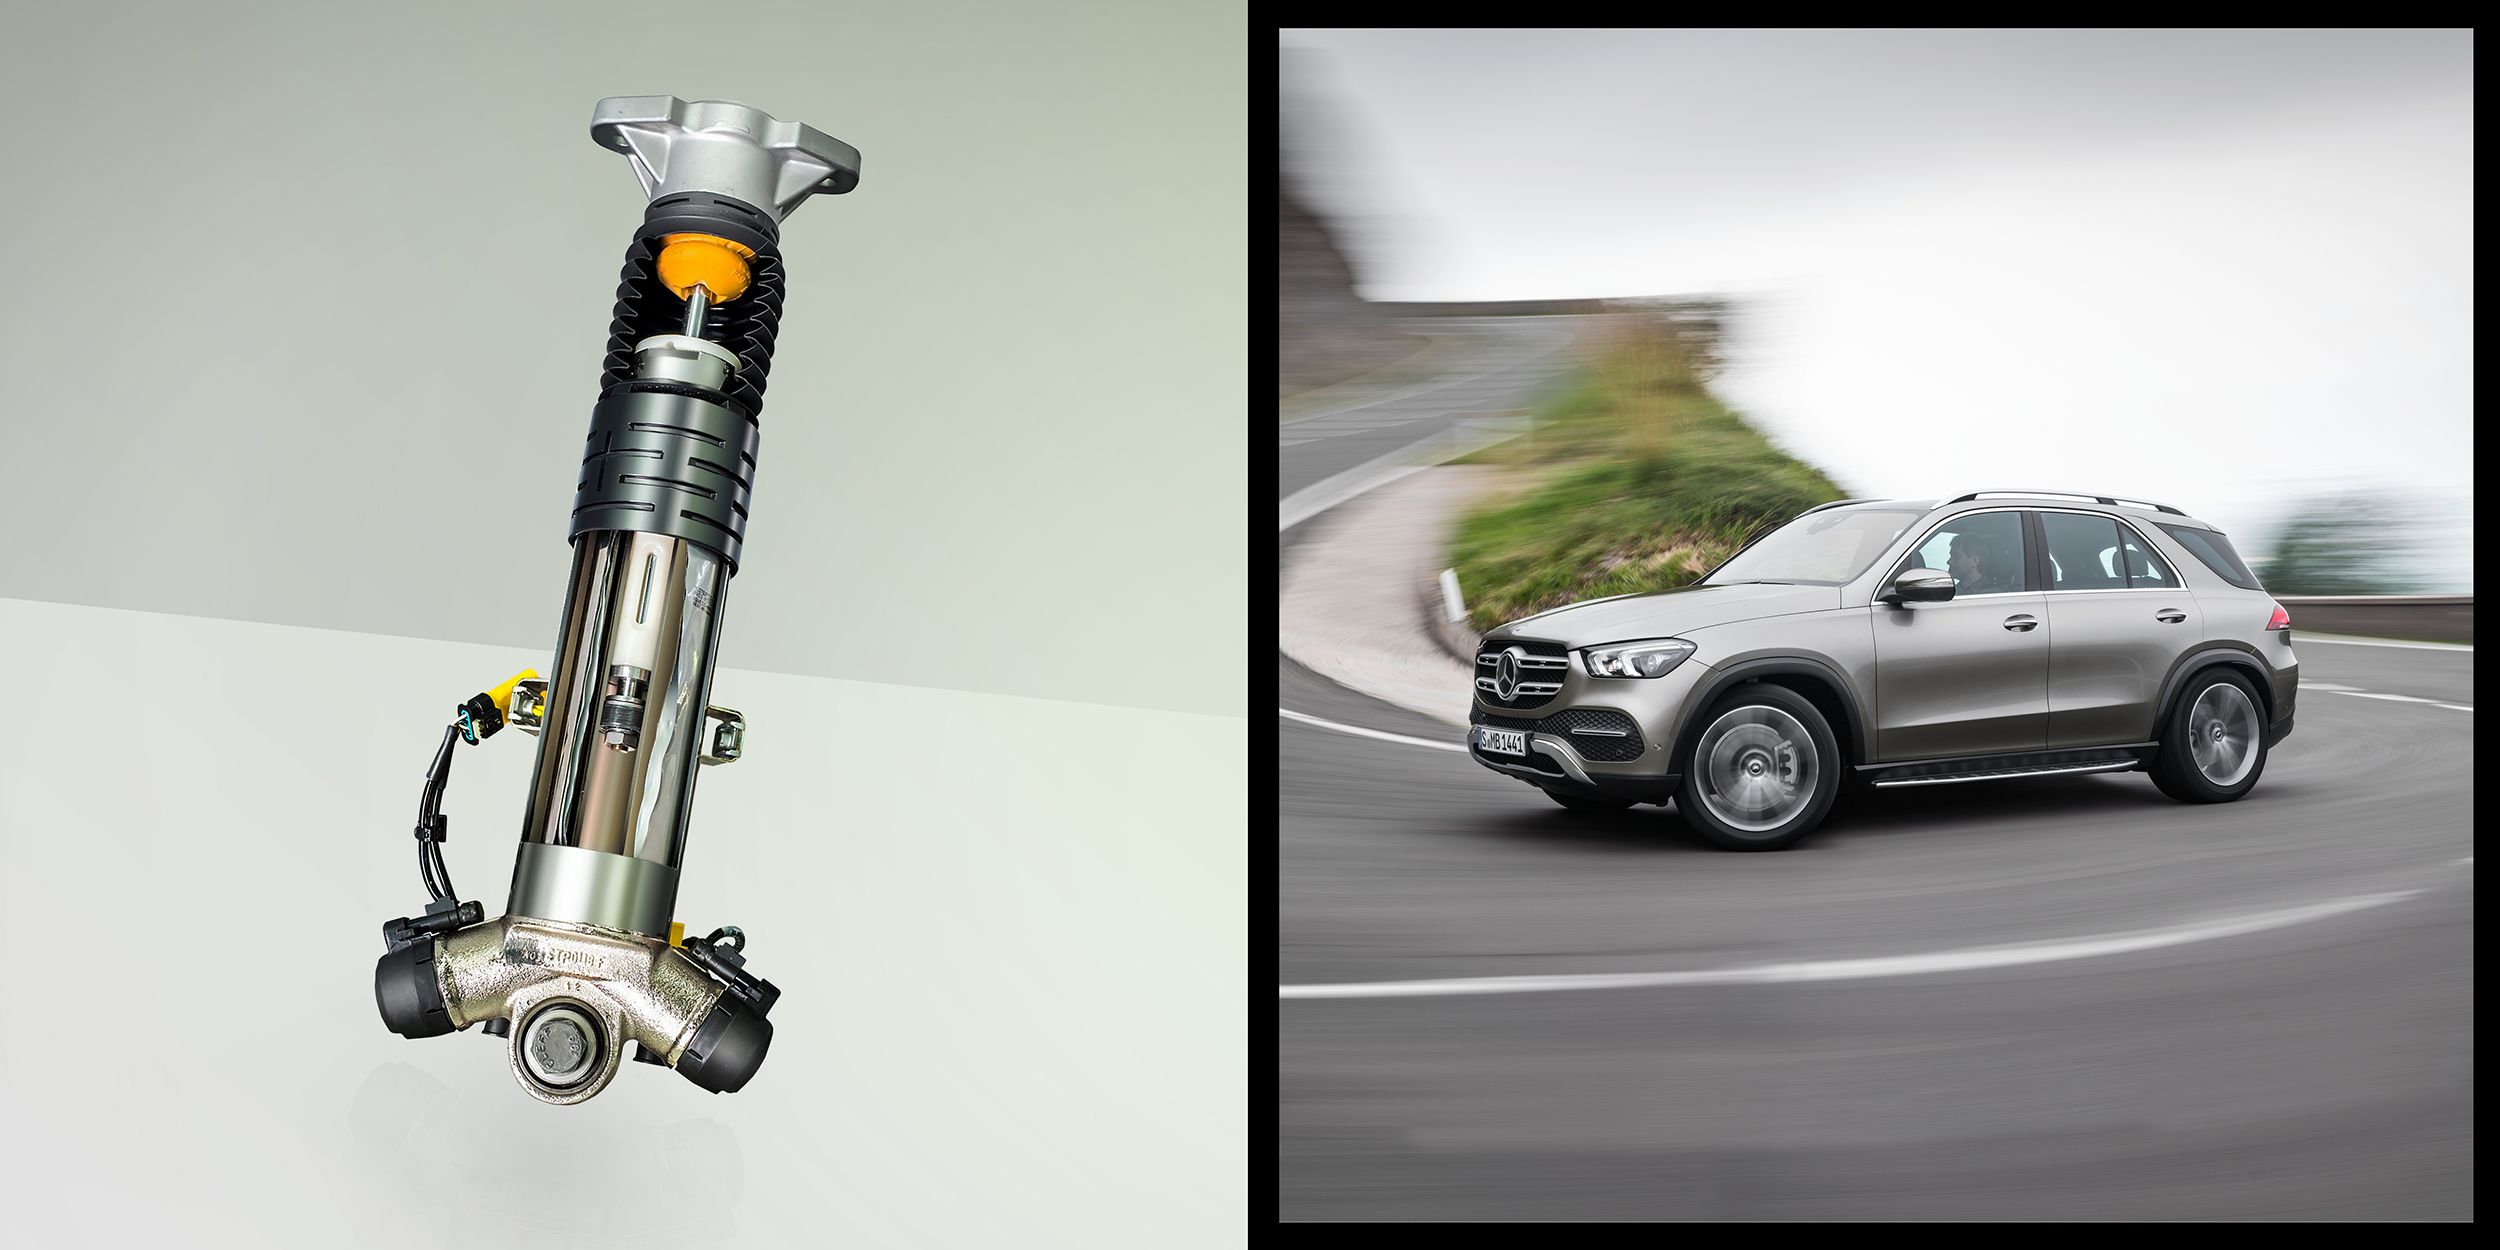 Mercedes-Benz Active Body Control -- Fully Active Suspension Technology 